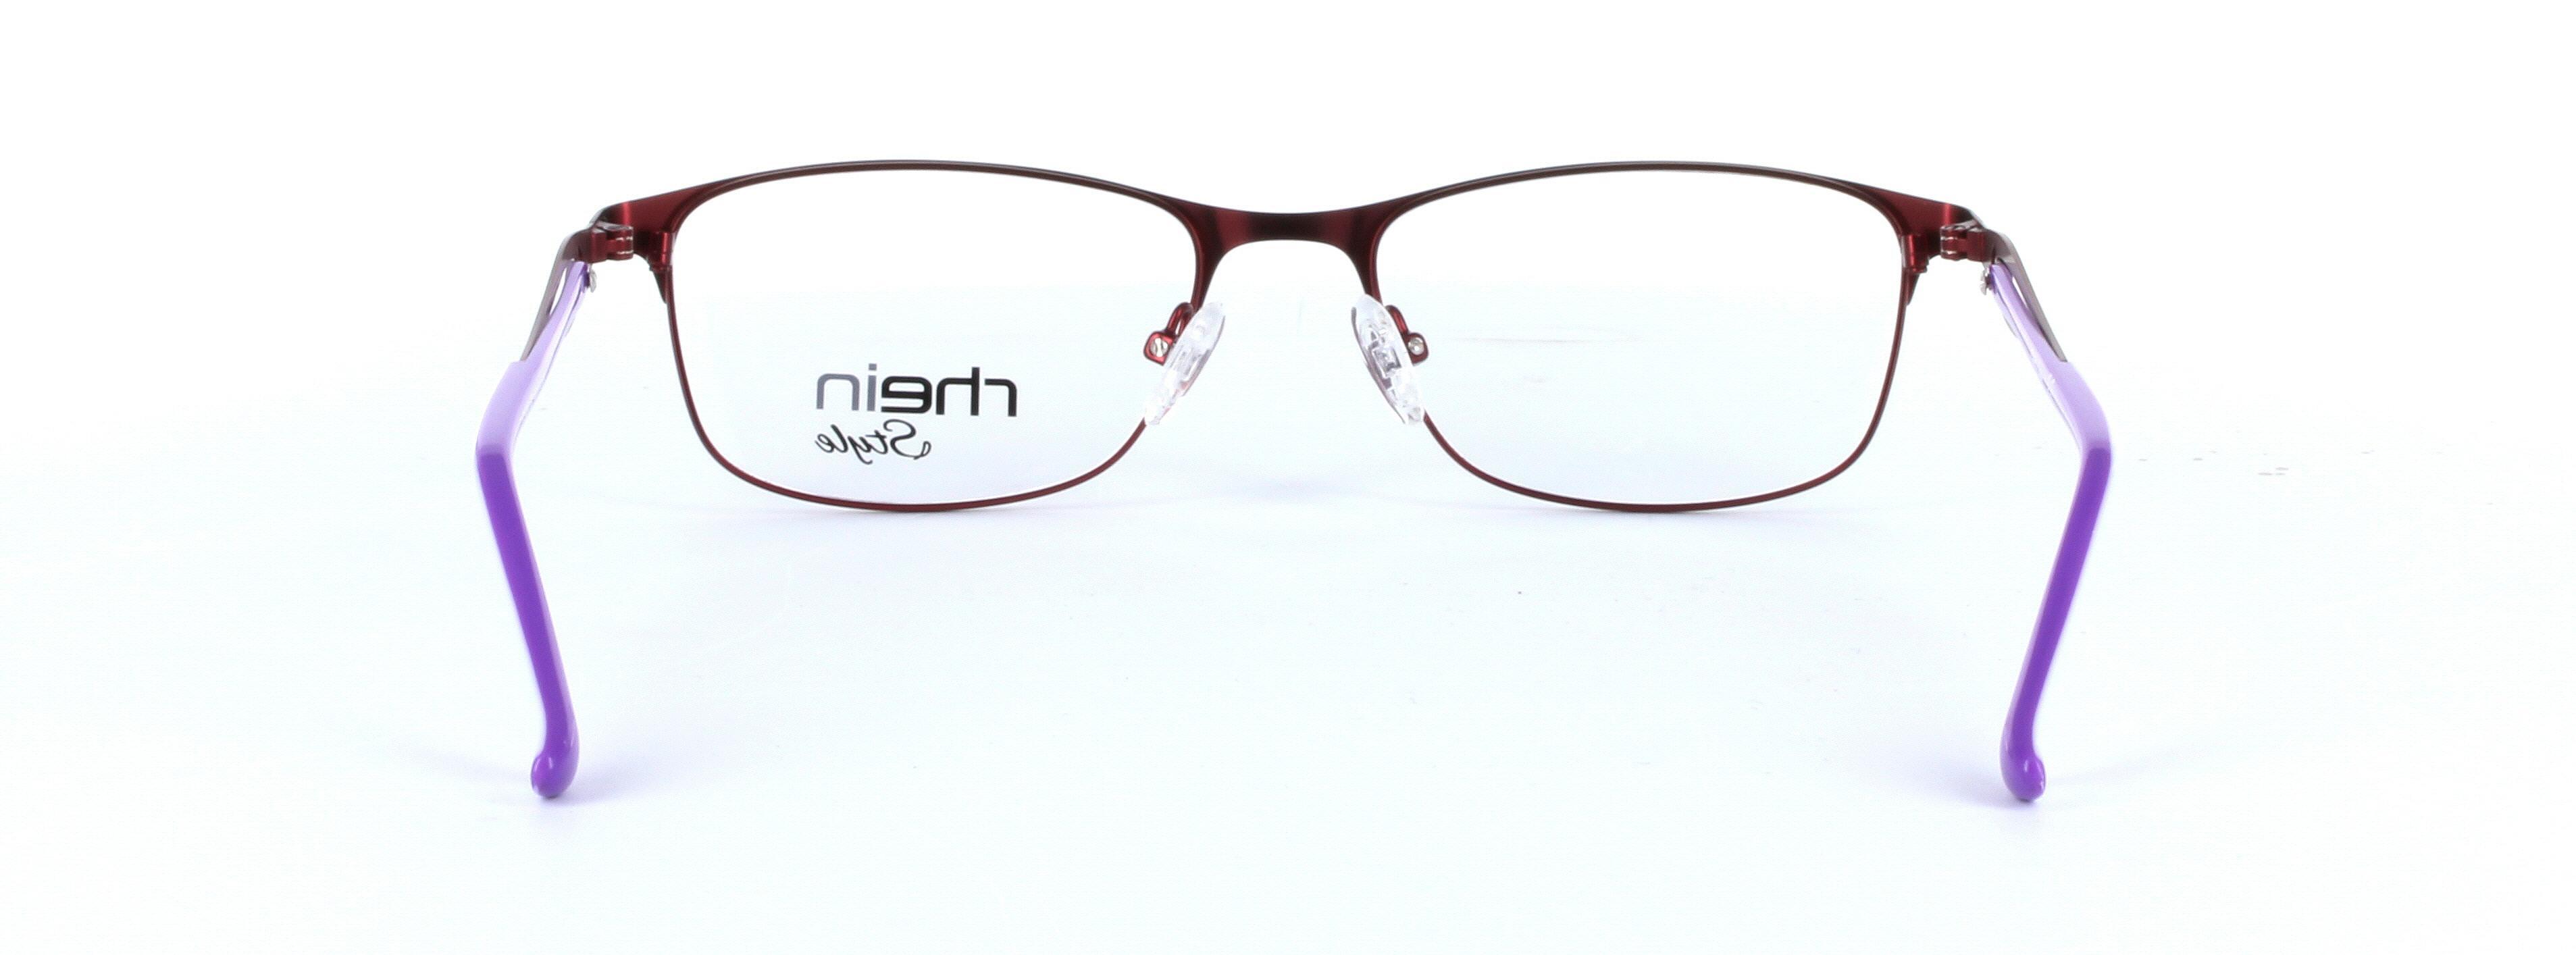 Canberra Bronze and Lilac Full Rim Rectangular Metal Glasses - Image View 3